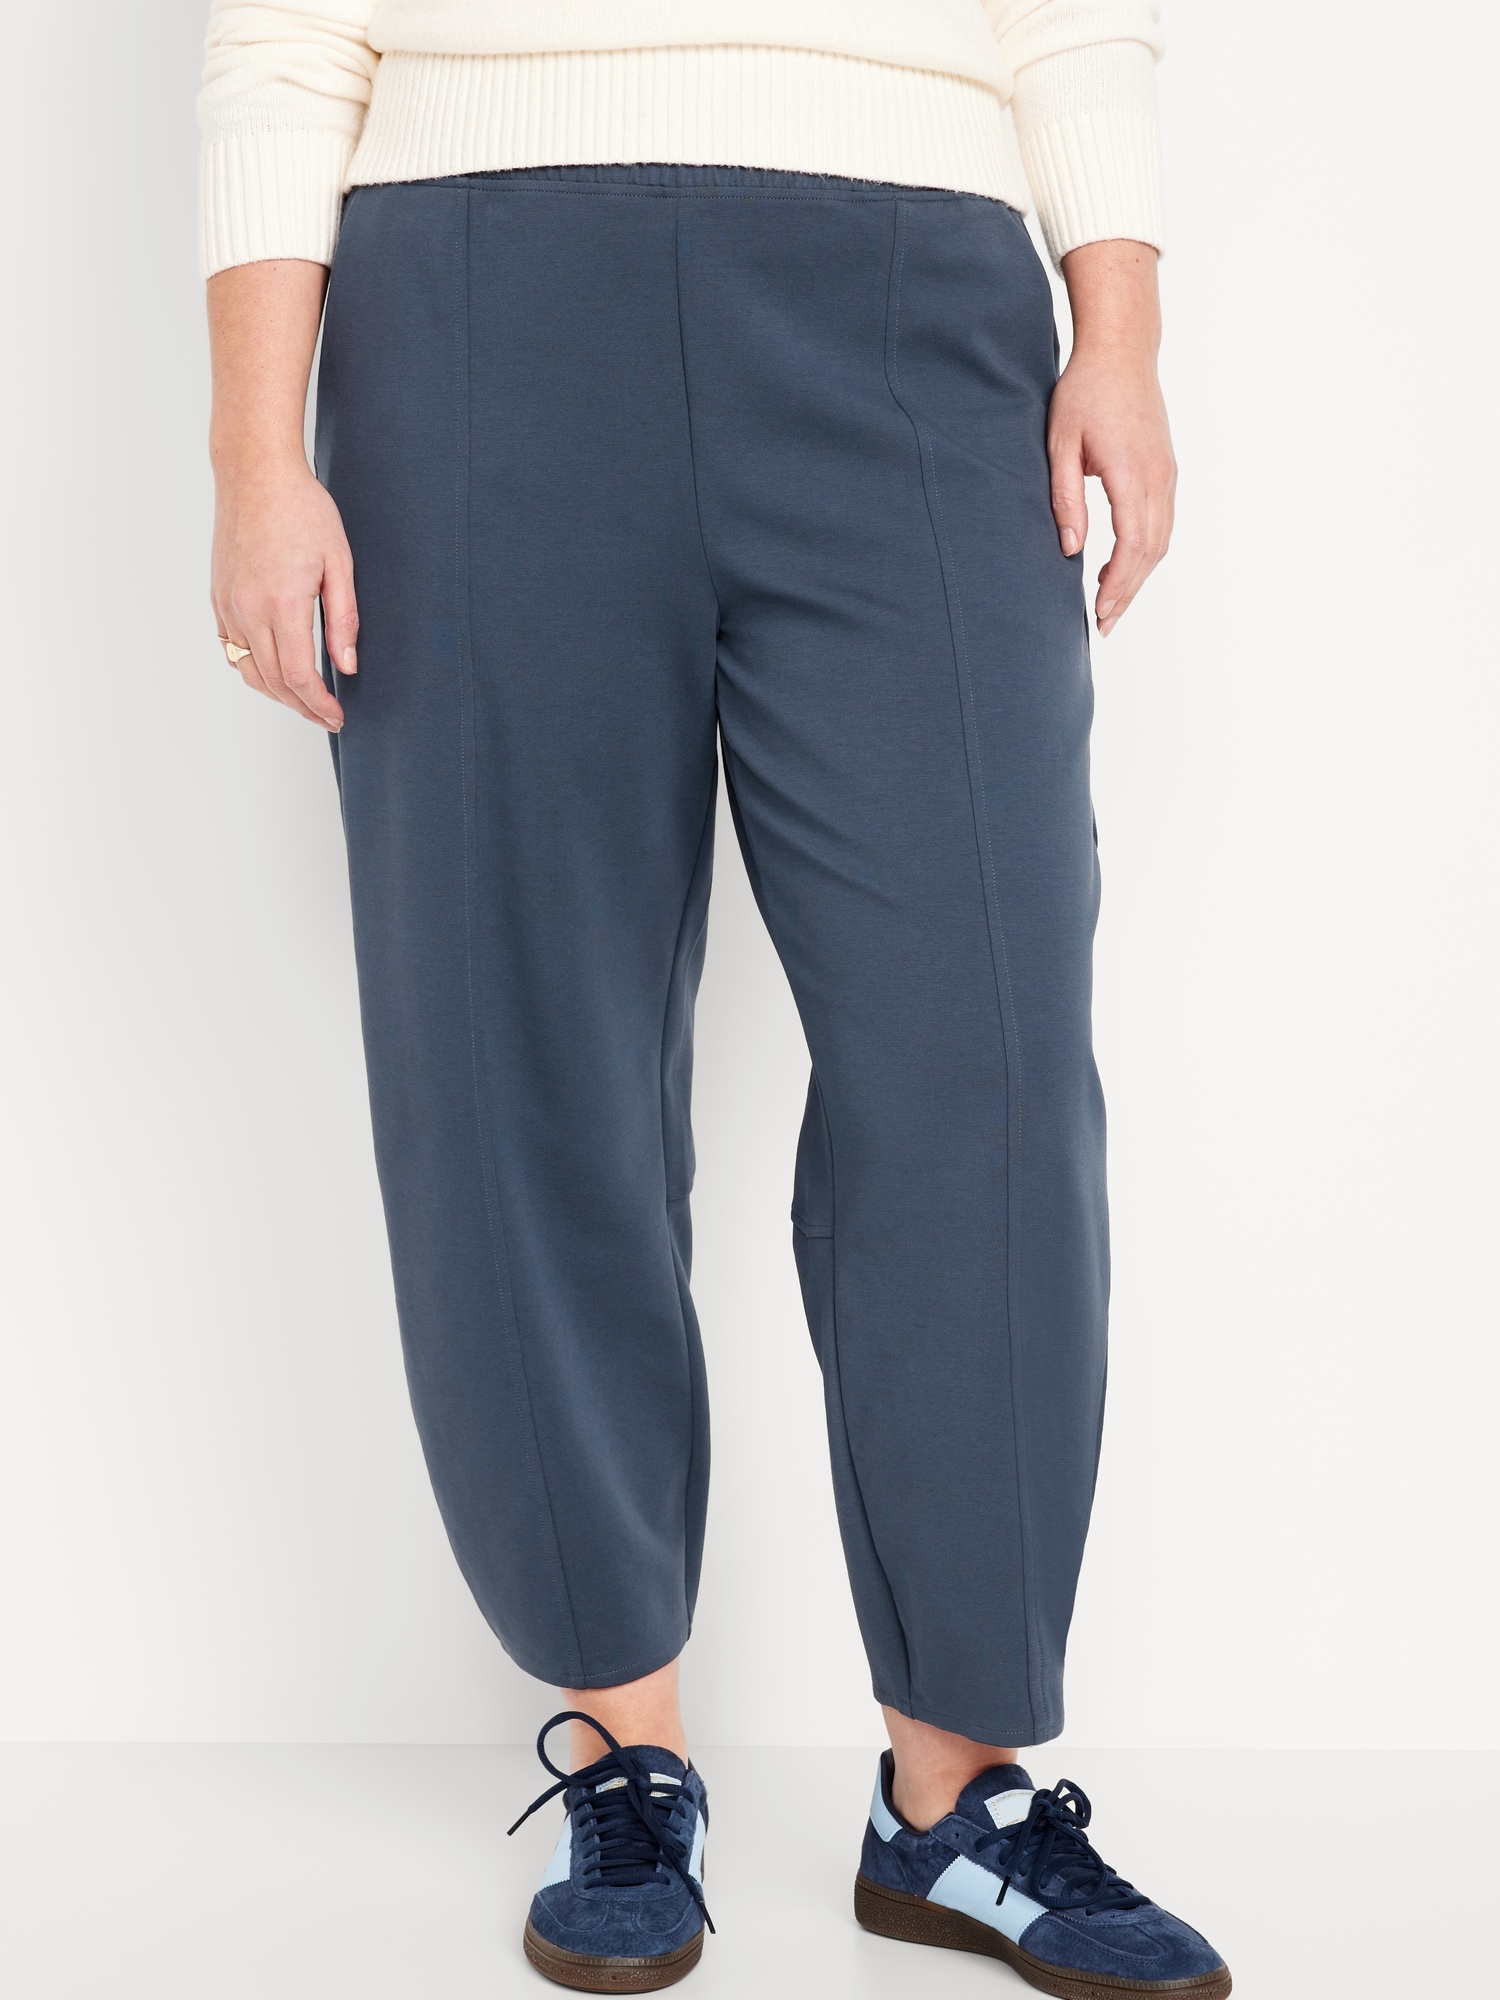 Old Navy High-Waisted Dynamic Fleece Pintucked Sweatpants for Women –  Search By Inseam